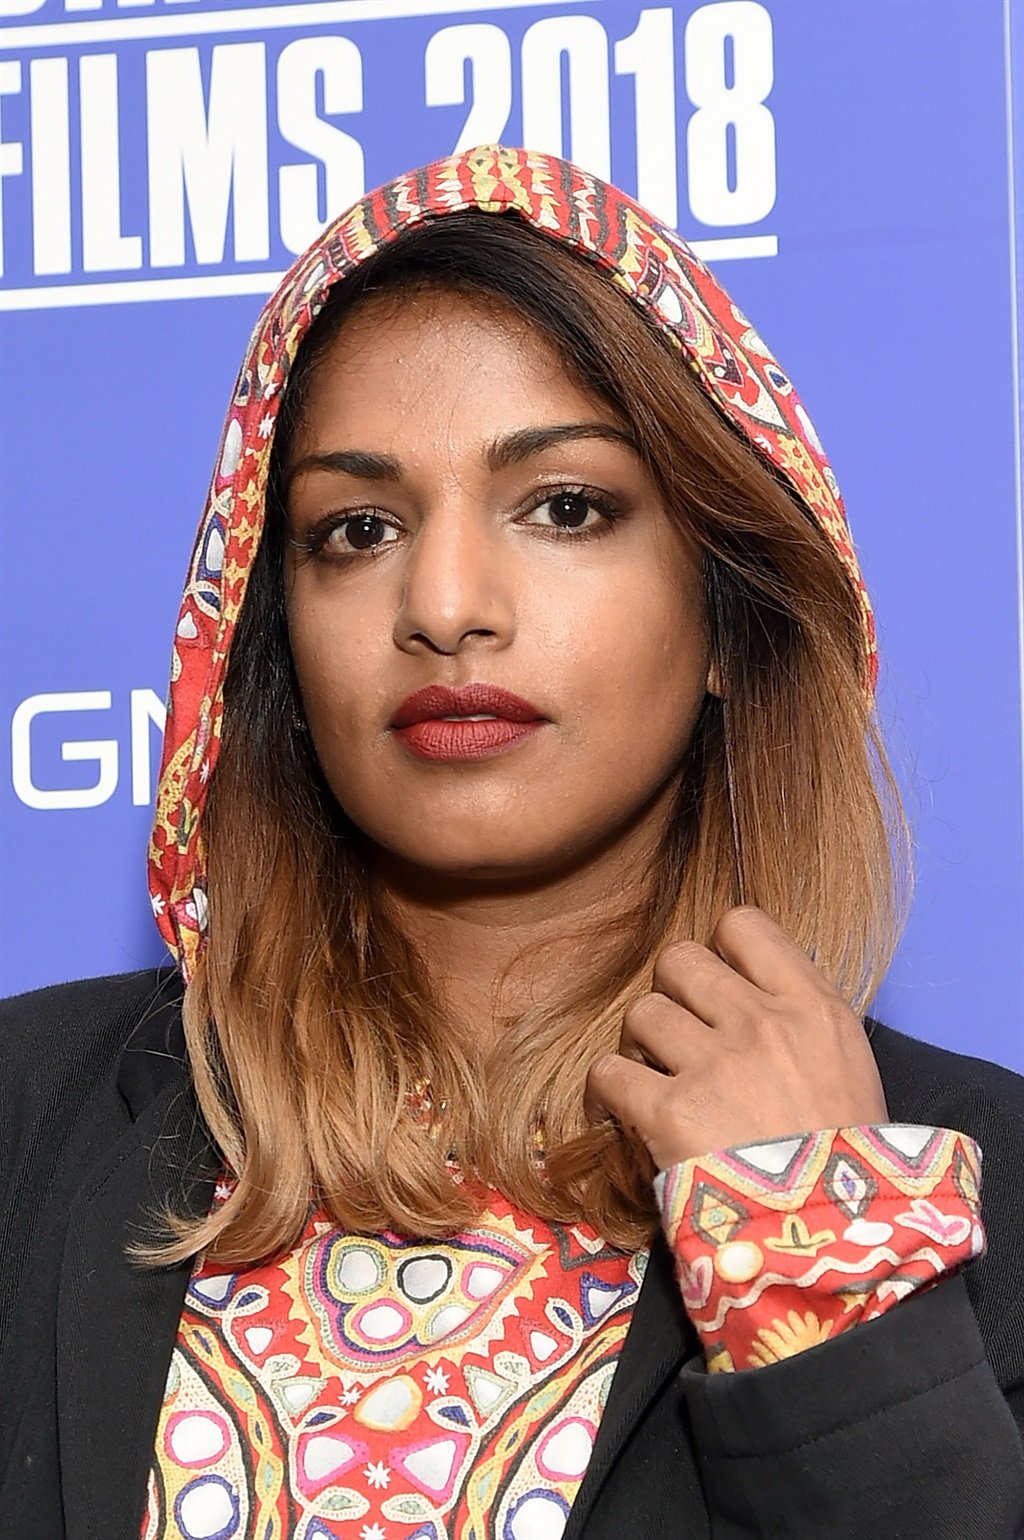 fist in the air Always unpredictable, rap star M.I.A. is packing for Johannesburg PHOTO: Mike Coppola / Getty Images